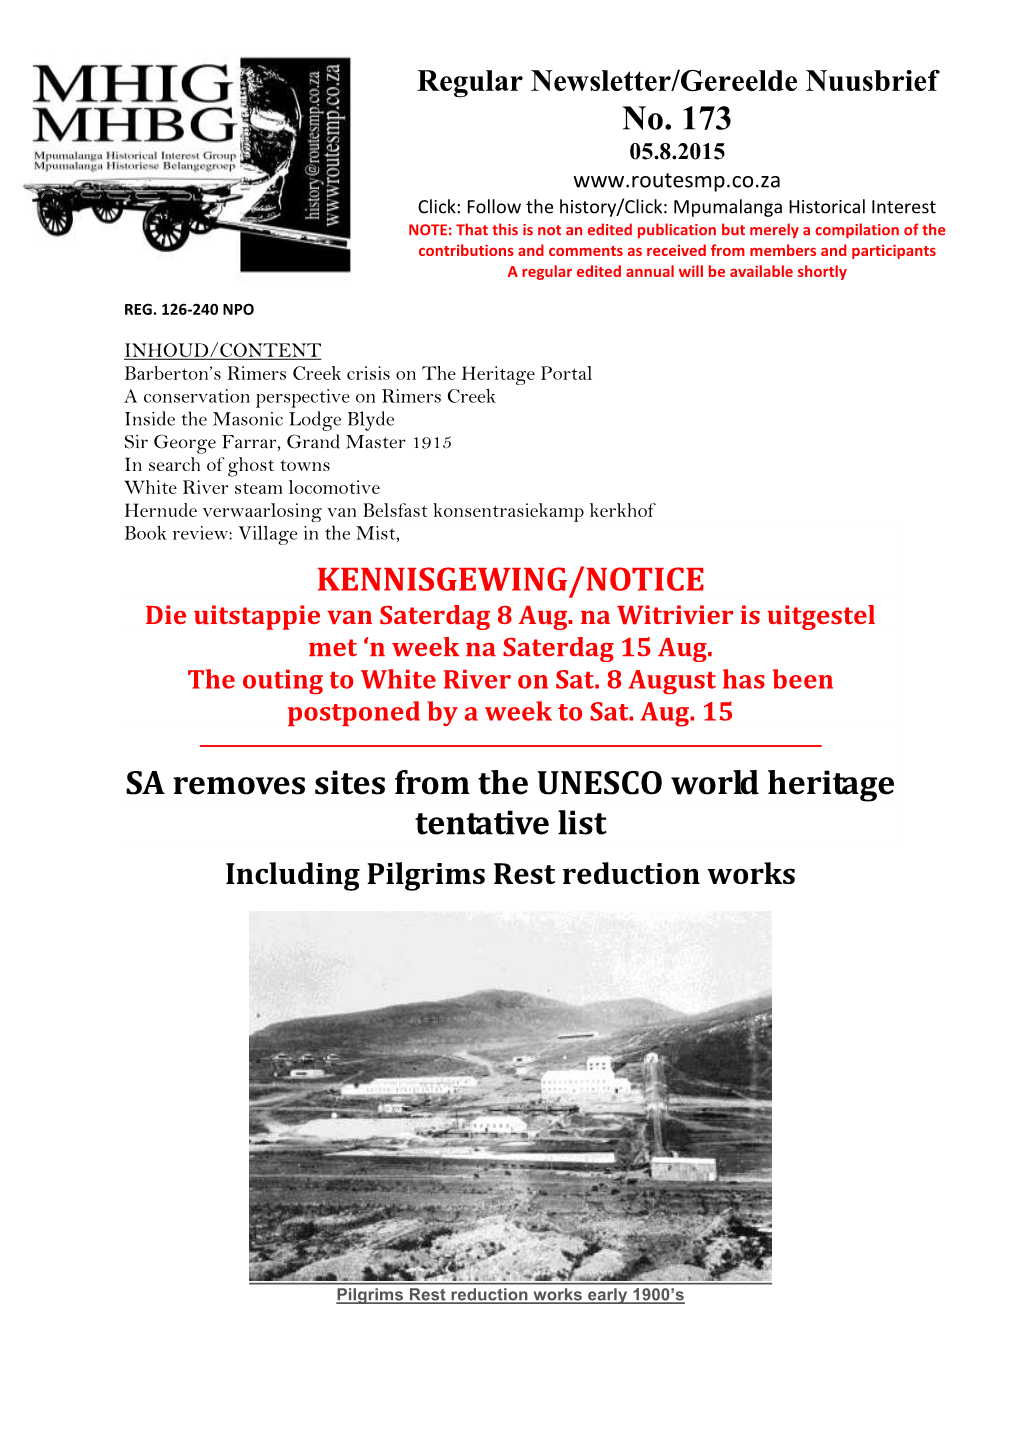 KENNISGEWING/NOTICE SA Removes Sites from the UNESCO